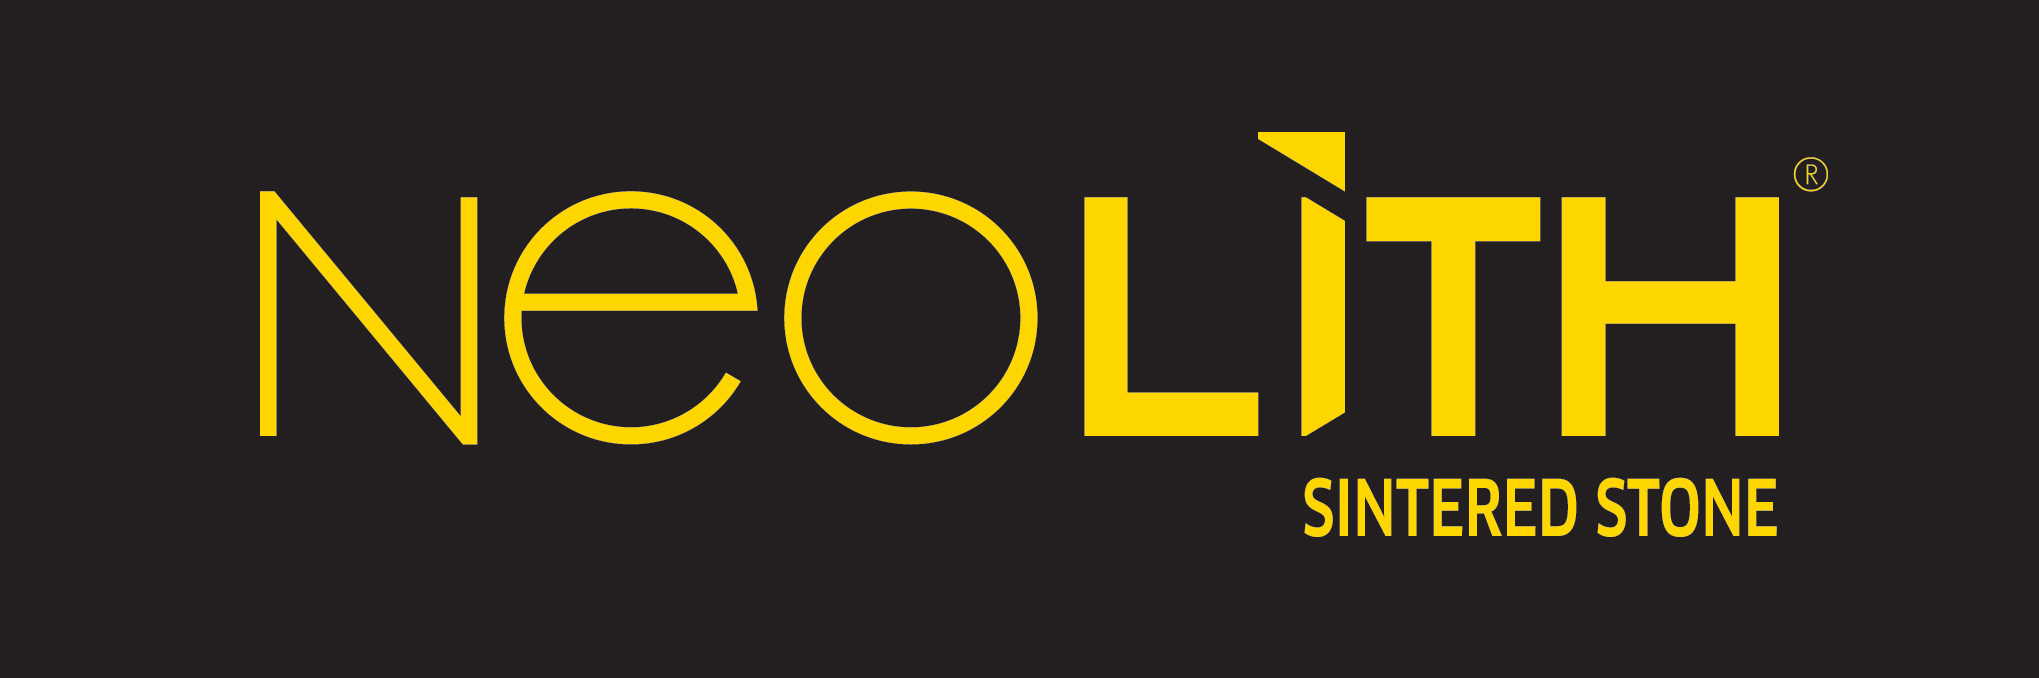 Neolith by TheSize logo.